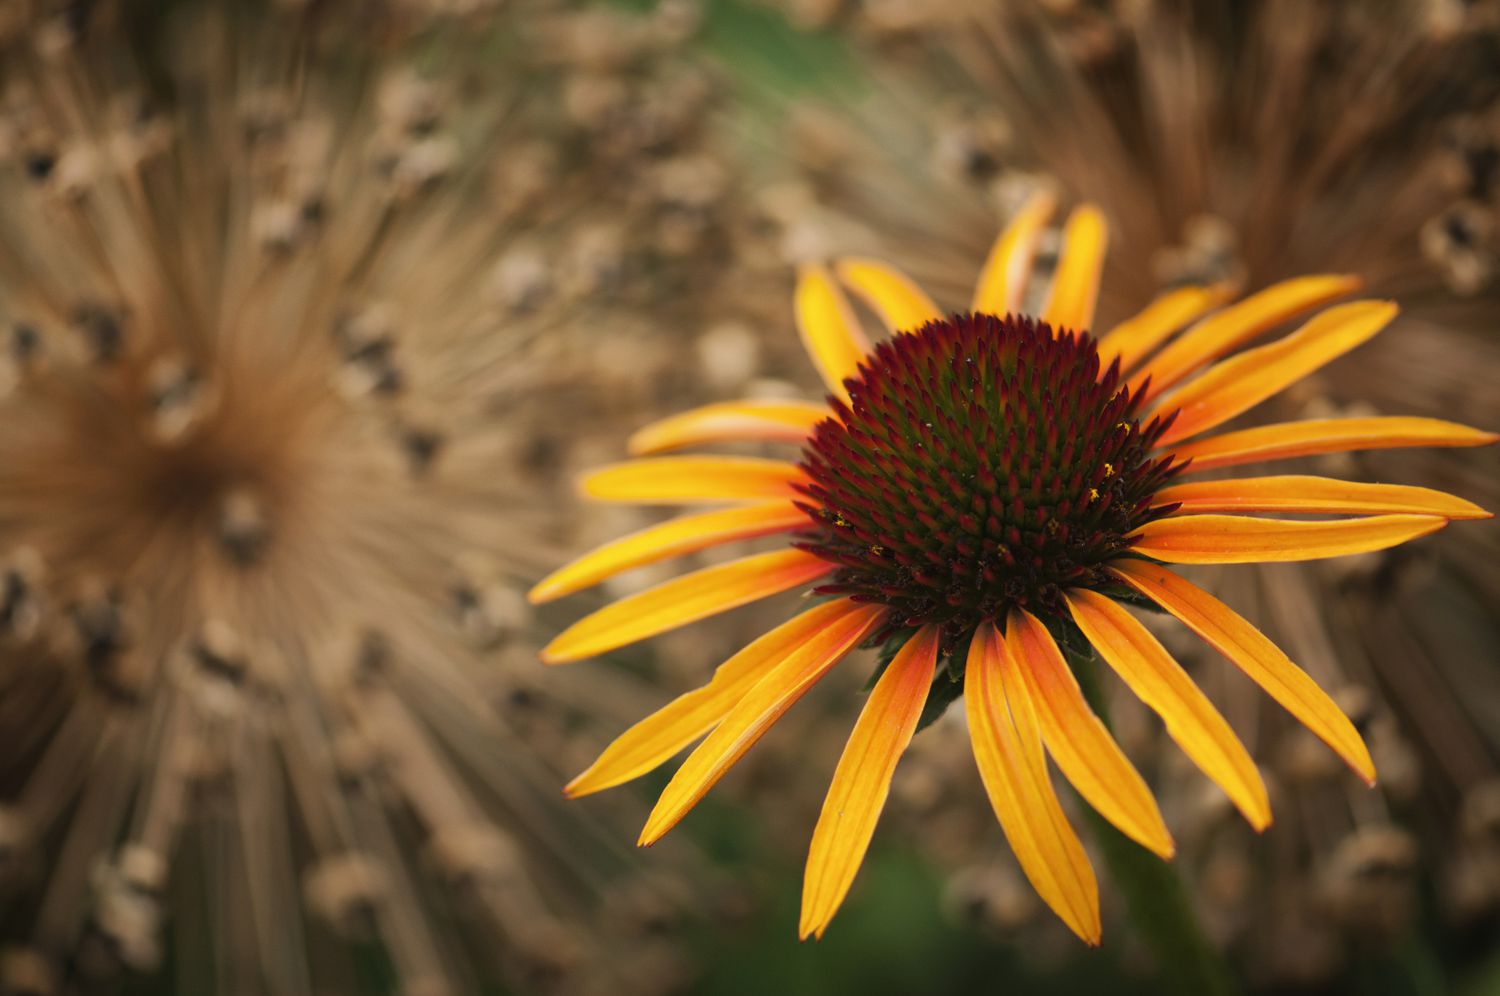 Flame thrower coneflower